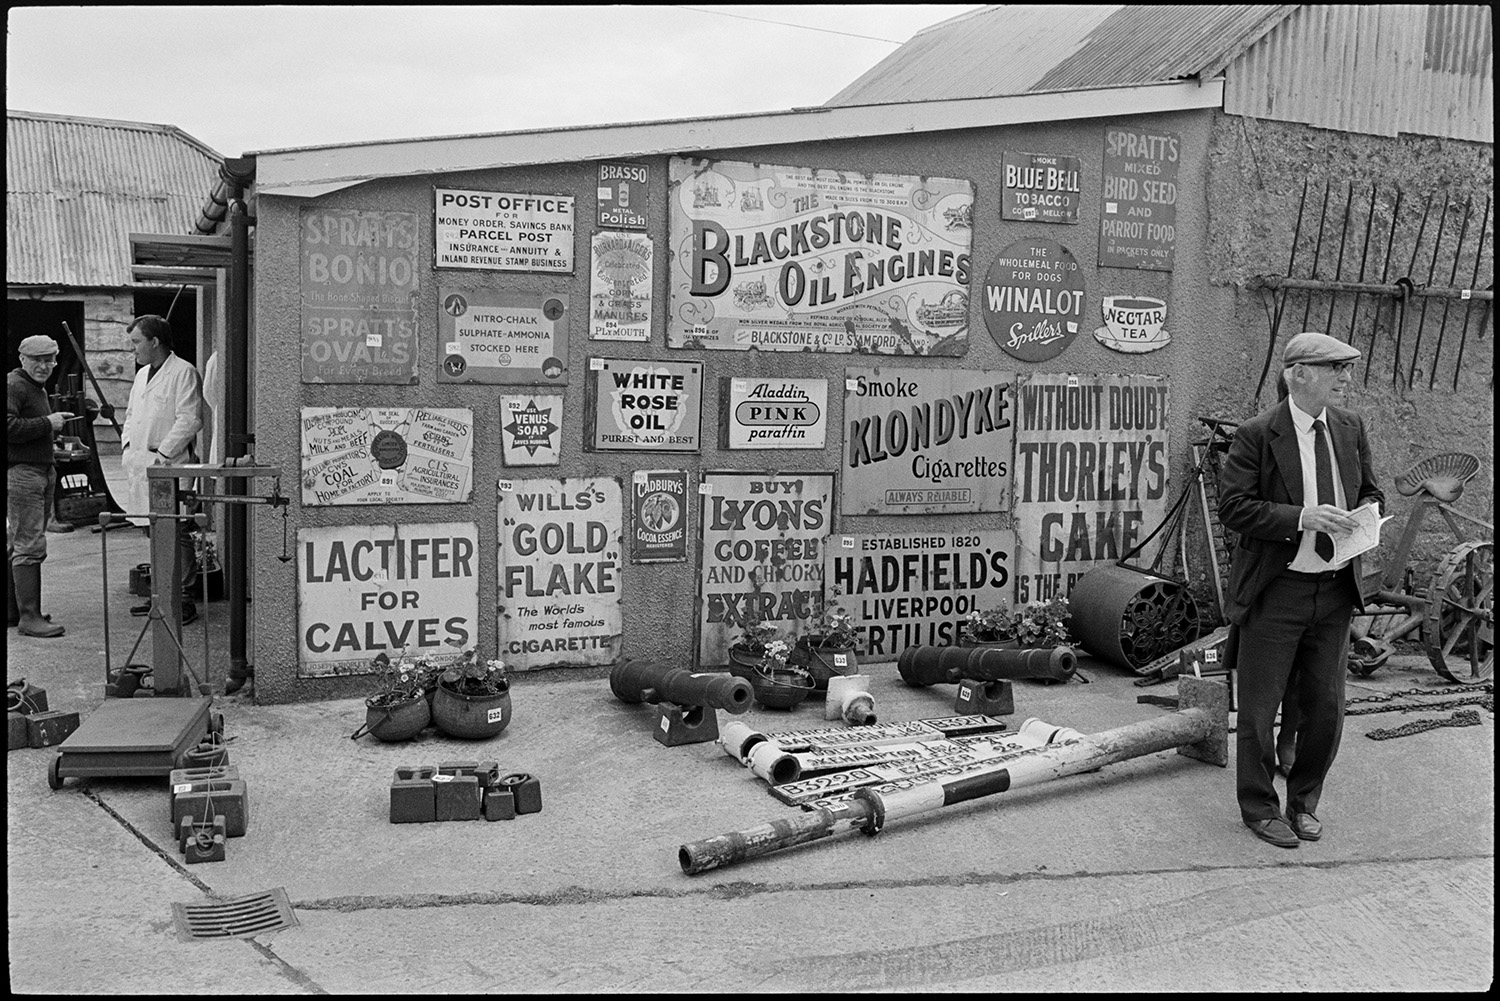 Sale of agricultural museum collection, signs, implements, machinery on display. Woodpile.
[A man in front of a collection of old advertisements, road signs, cannons, a roller and other agricultural items for sale at the Ashley Countryside Collection, Hollocombe. Advertisements include products such as White Rose Oil, Alladin Pink Paraffin, Klondyke cigarettes and Blackstone Oil Engines.]